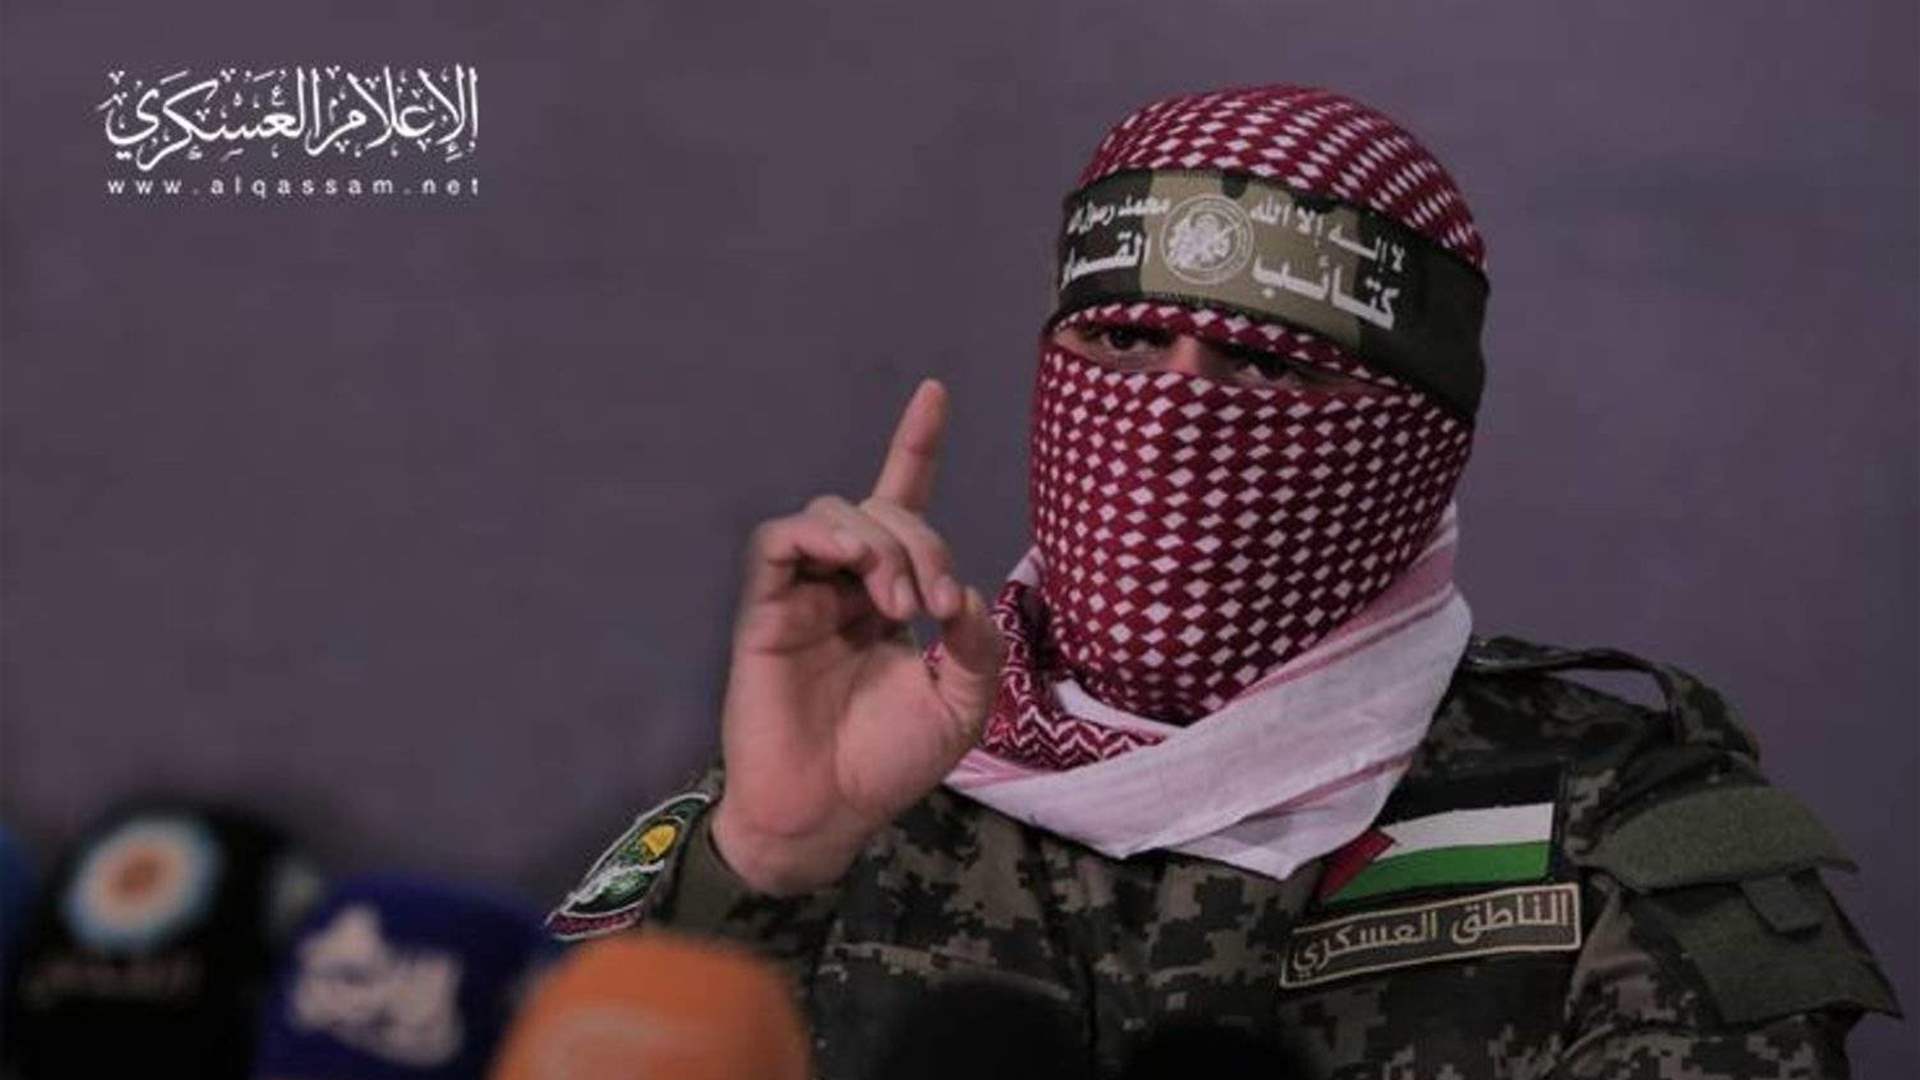 Al-Qassam Brigades spokesman: We call for an escalation of the confrontation in all parts of the West Bank and all resistance fronts